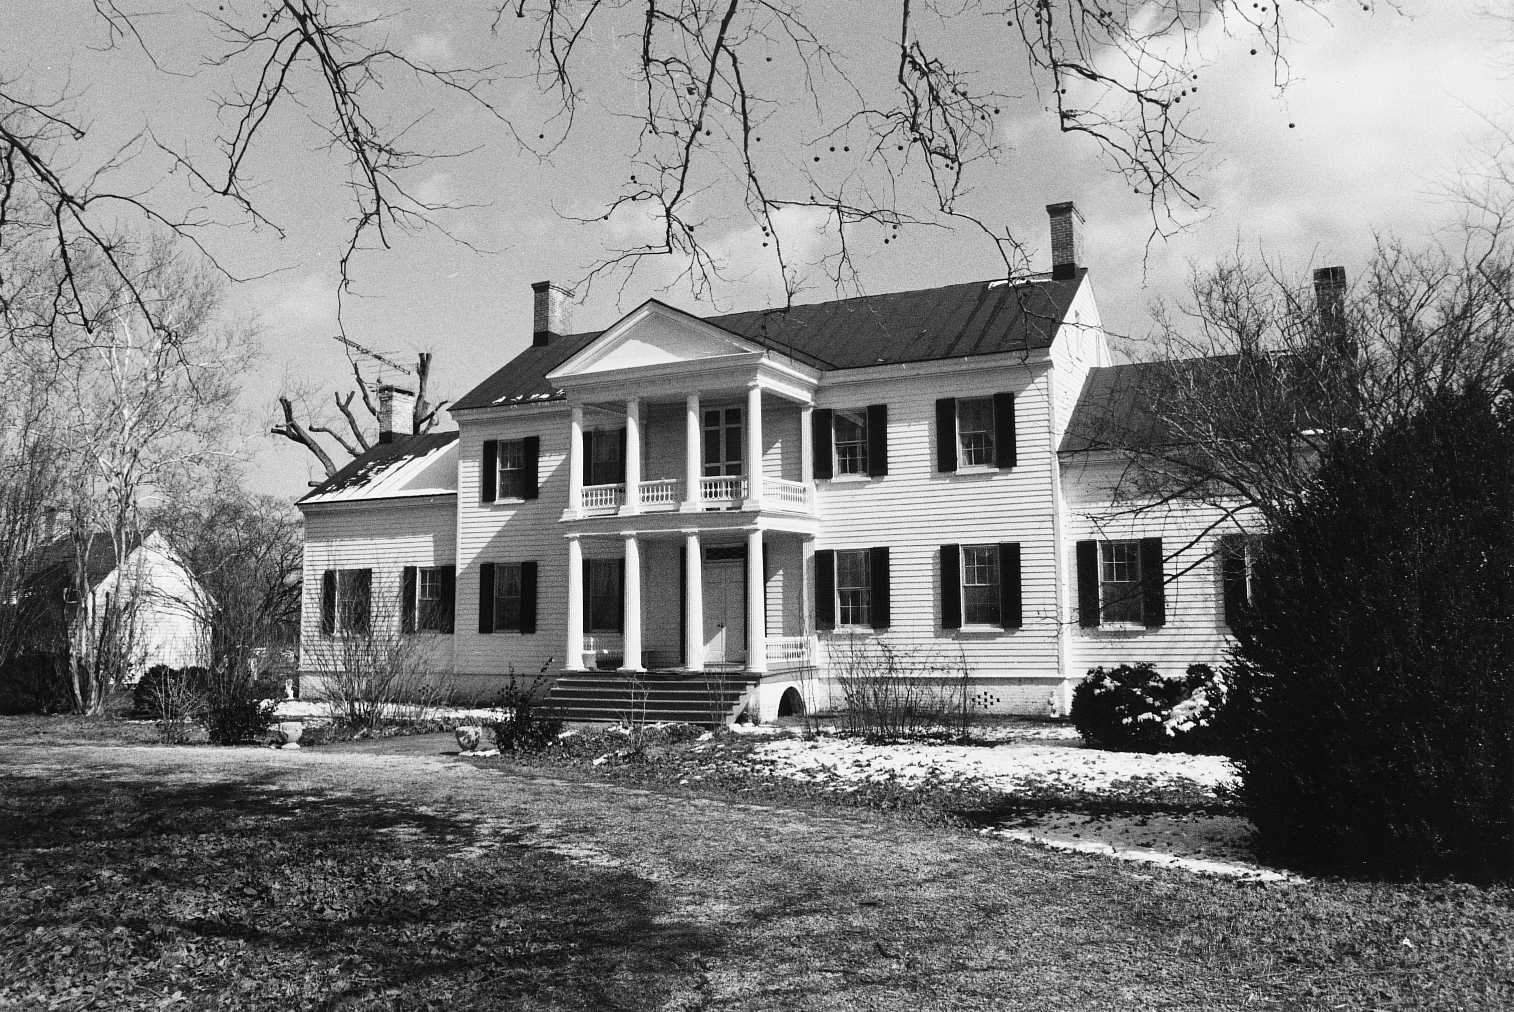 066-0013_Wheatland_exterior_front_elevation_VLR_4th_edition